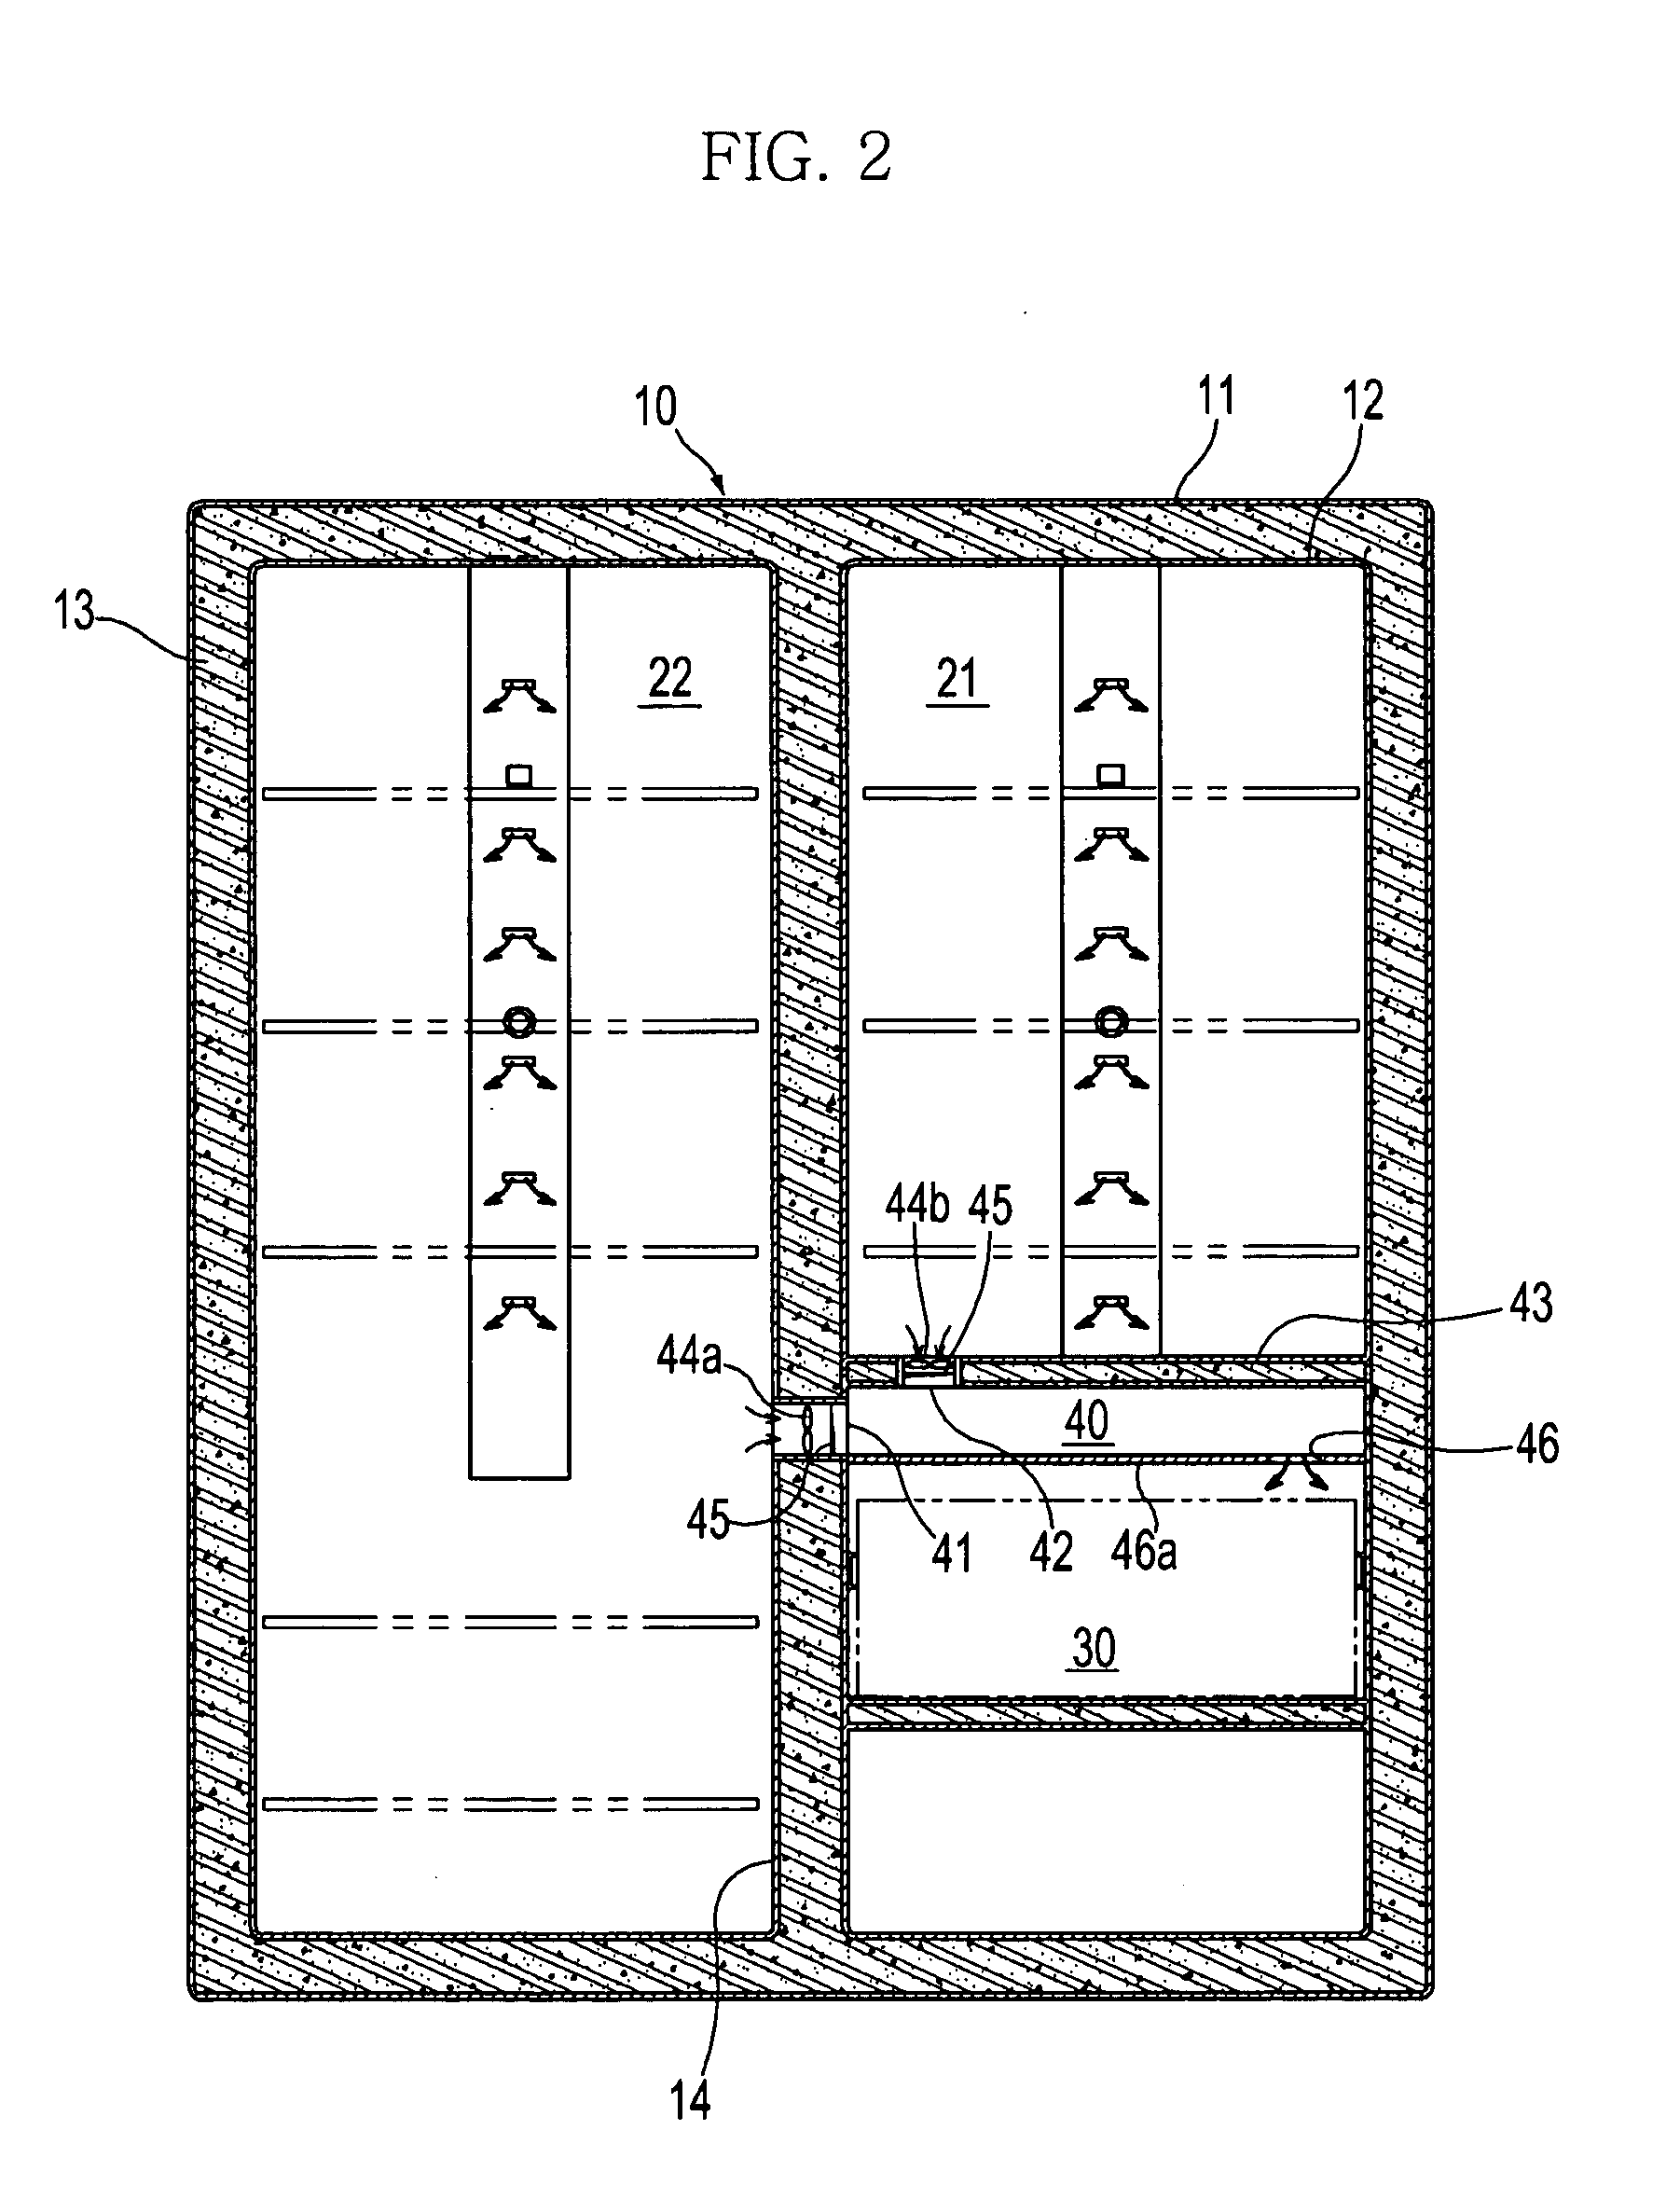 Refrigerator and method for producing supercooled liquid